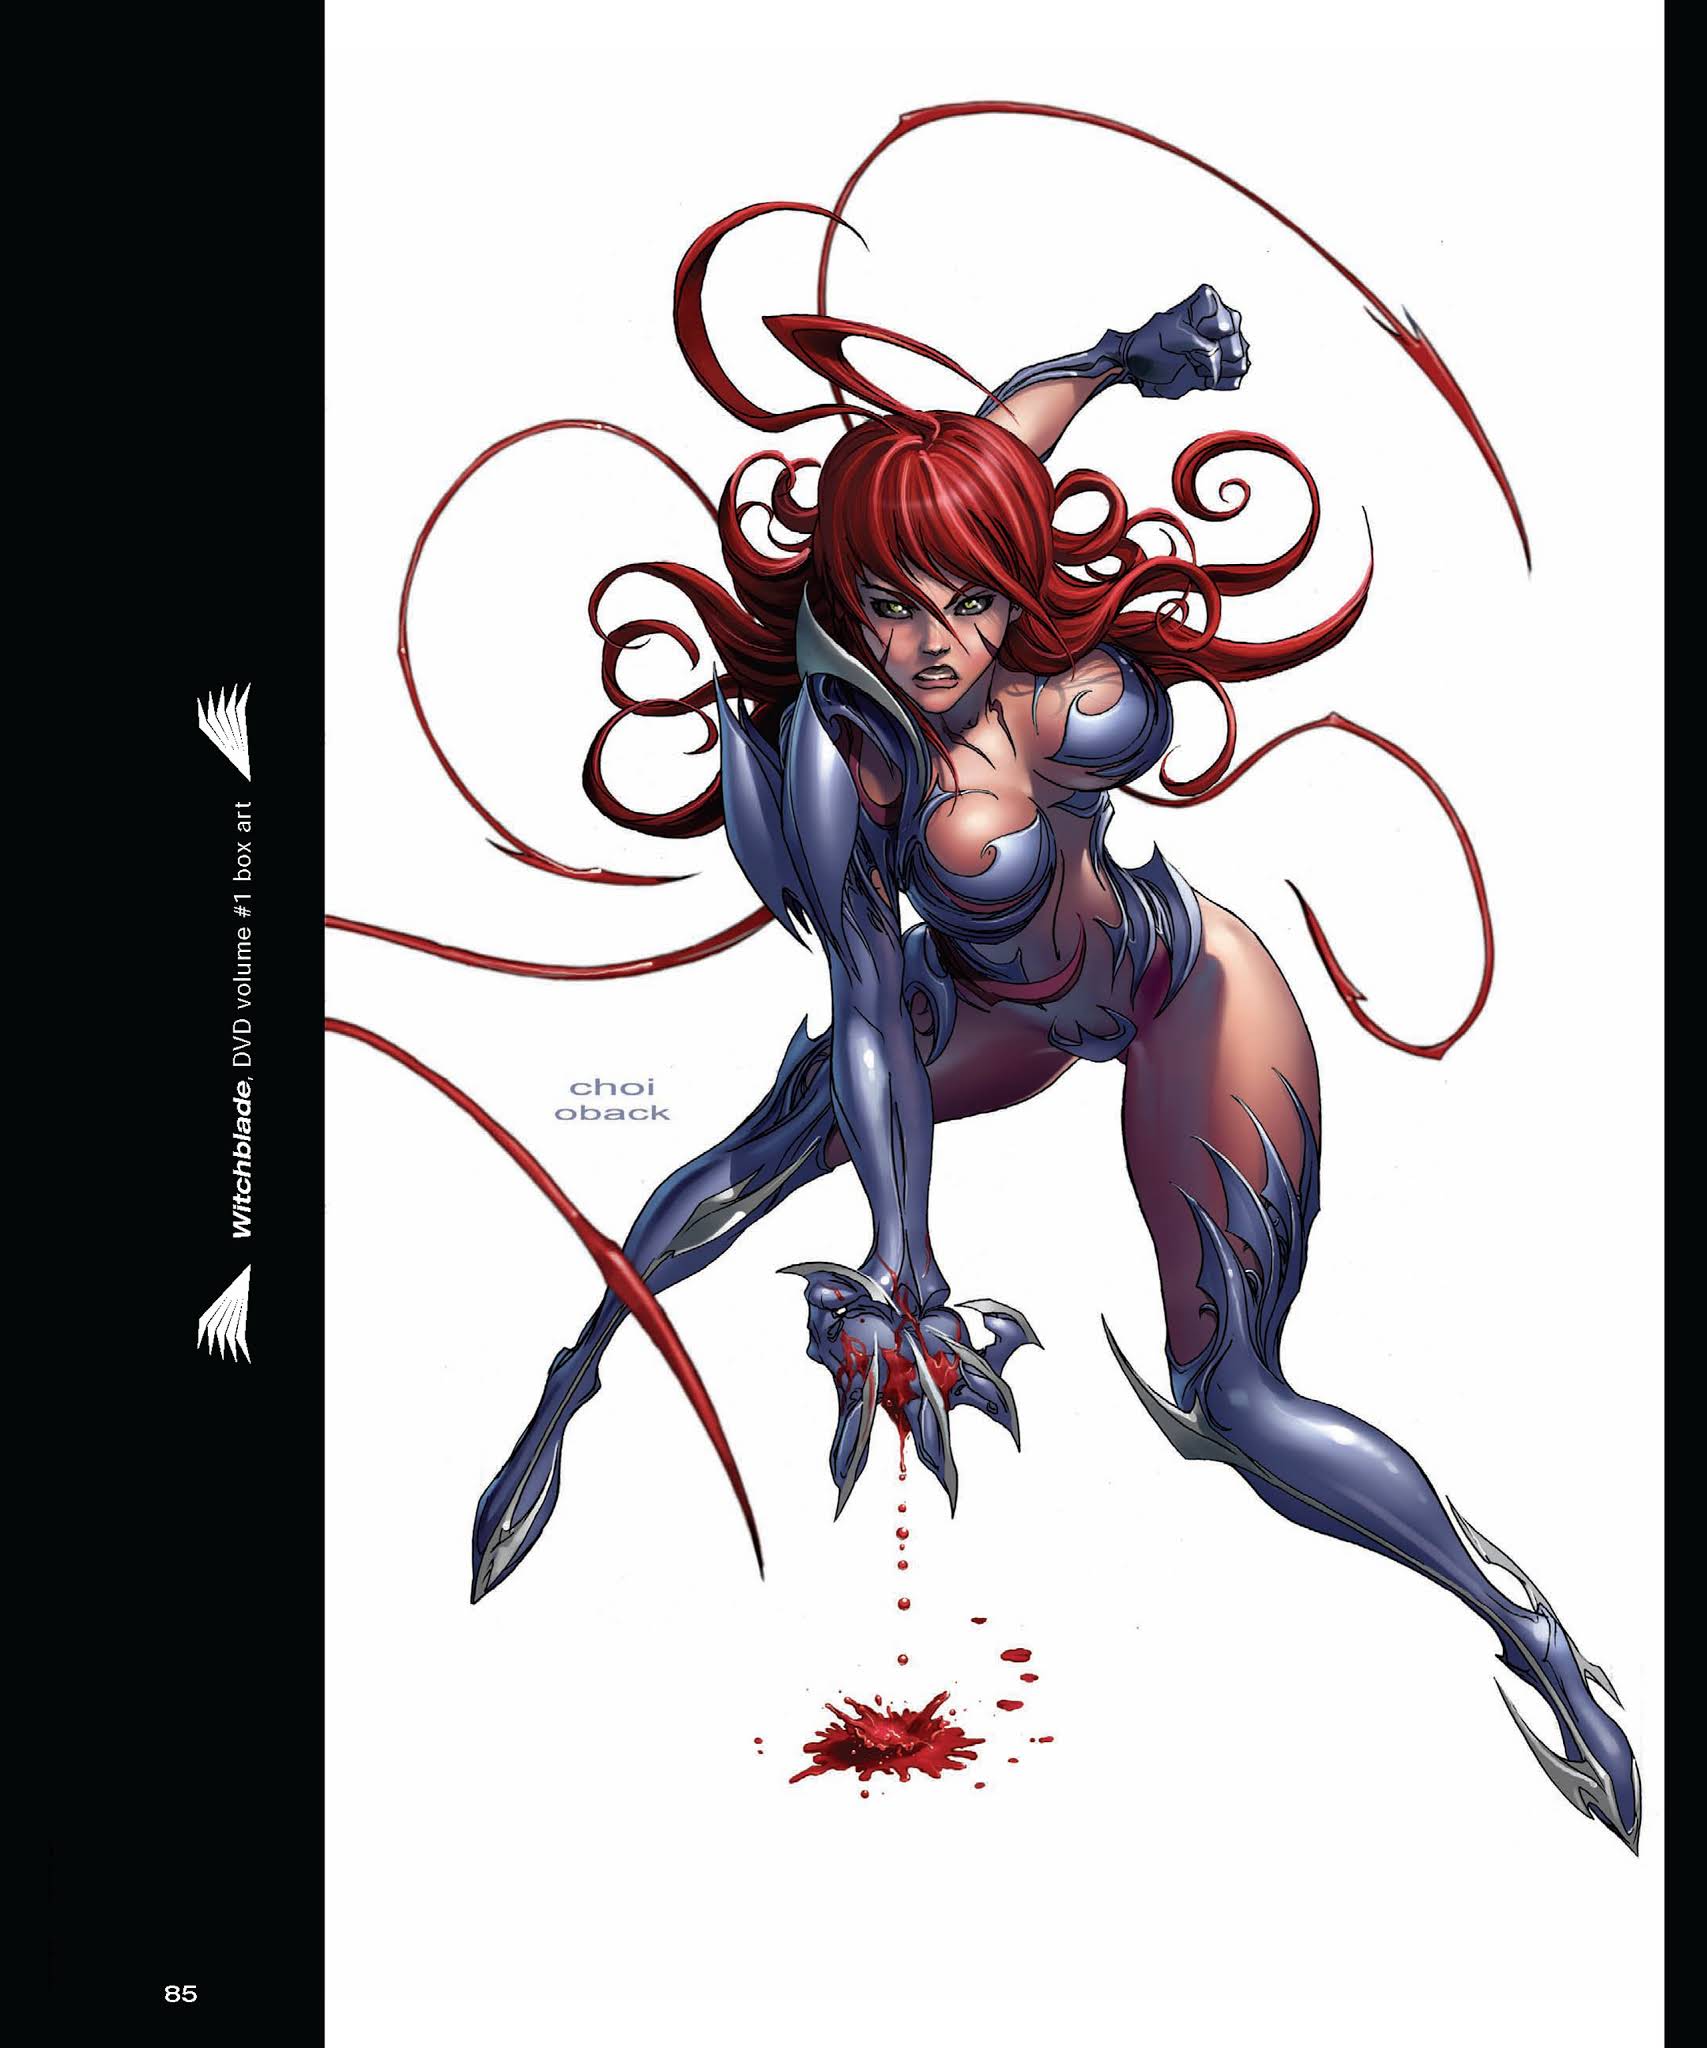 Read online Witchblade: Art of Witchblade comic -  Issue # TPB - 80